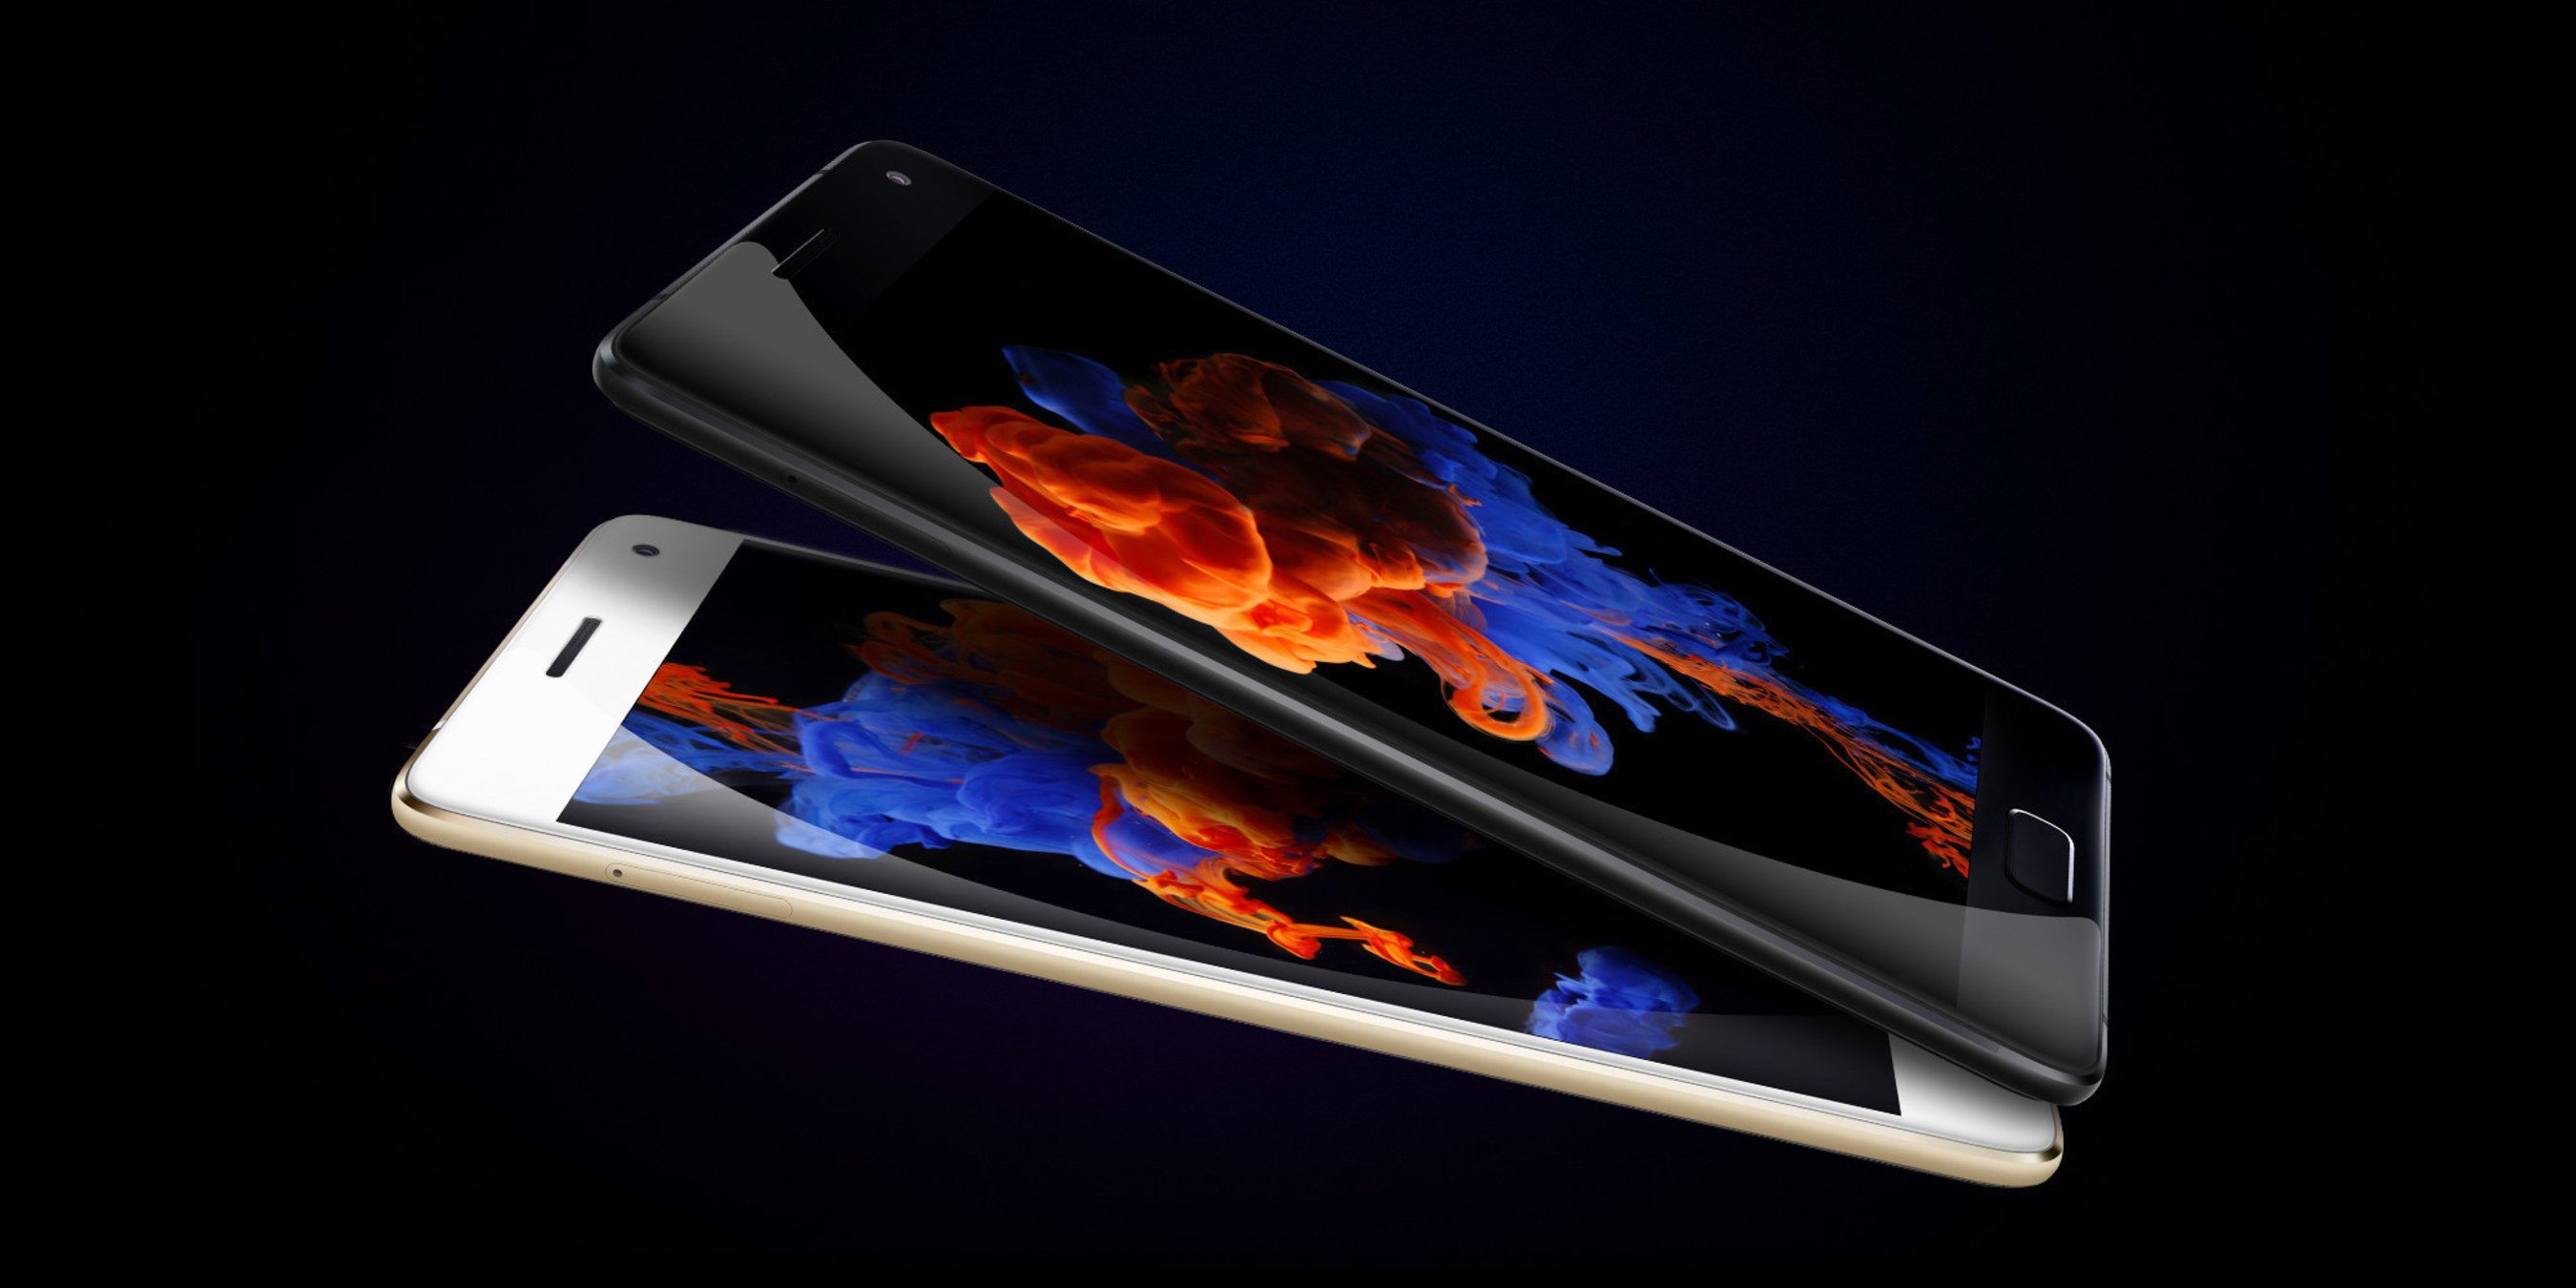 Lenovo ZUK launches a New Android Flagship Z2 Pro that Integrates 10 Professional Sensors and Sets Nine World Records